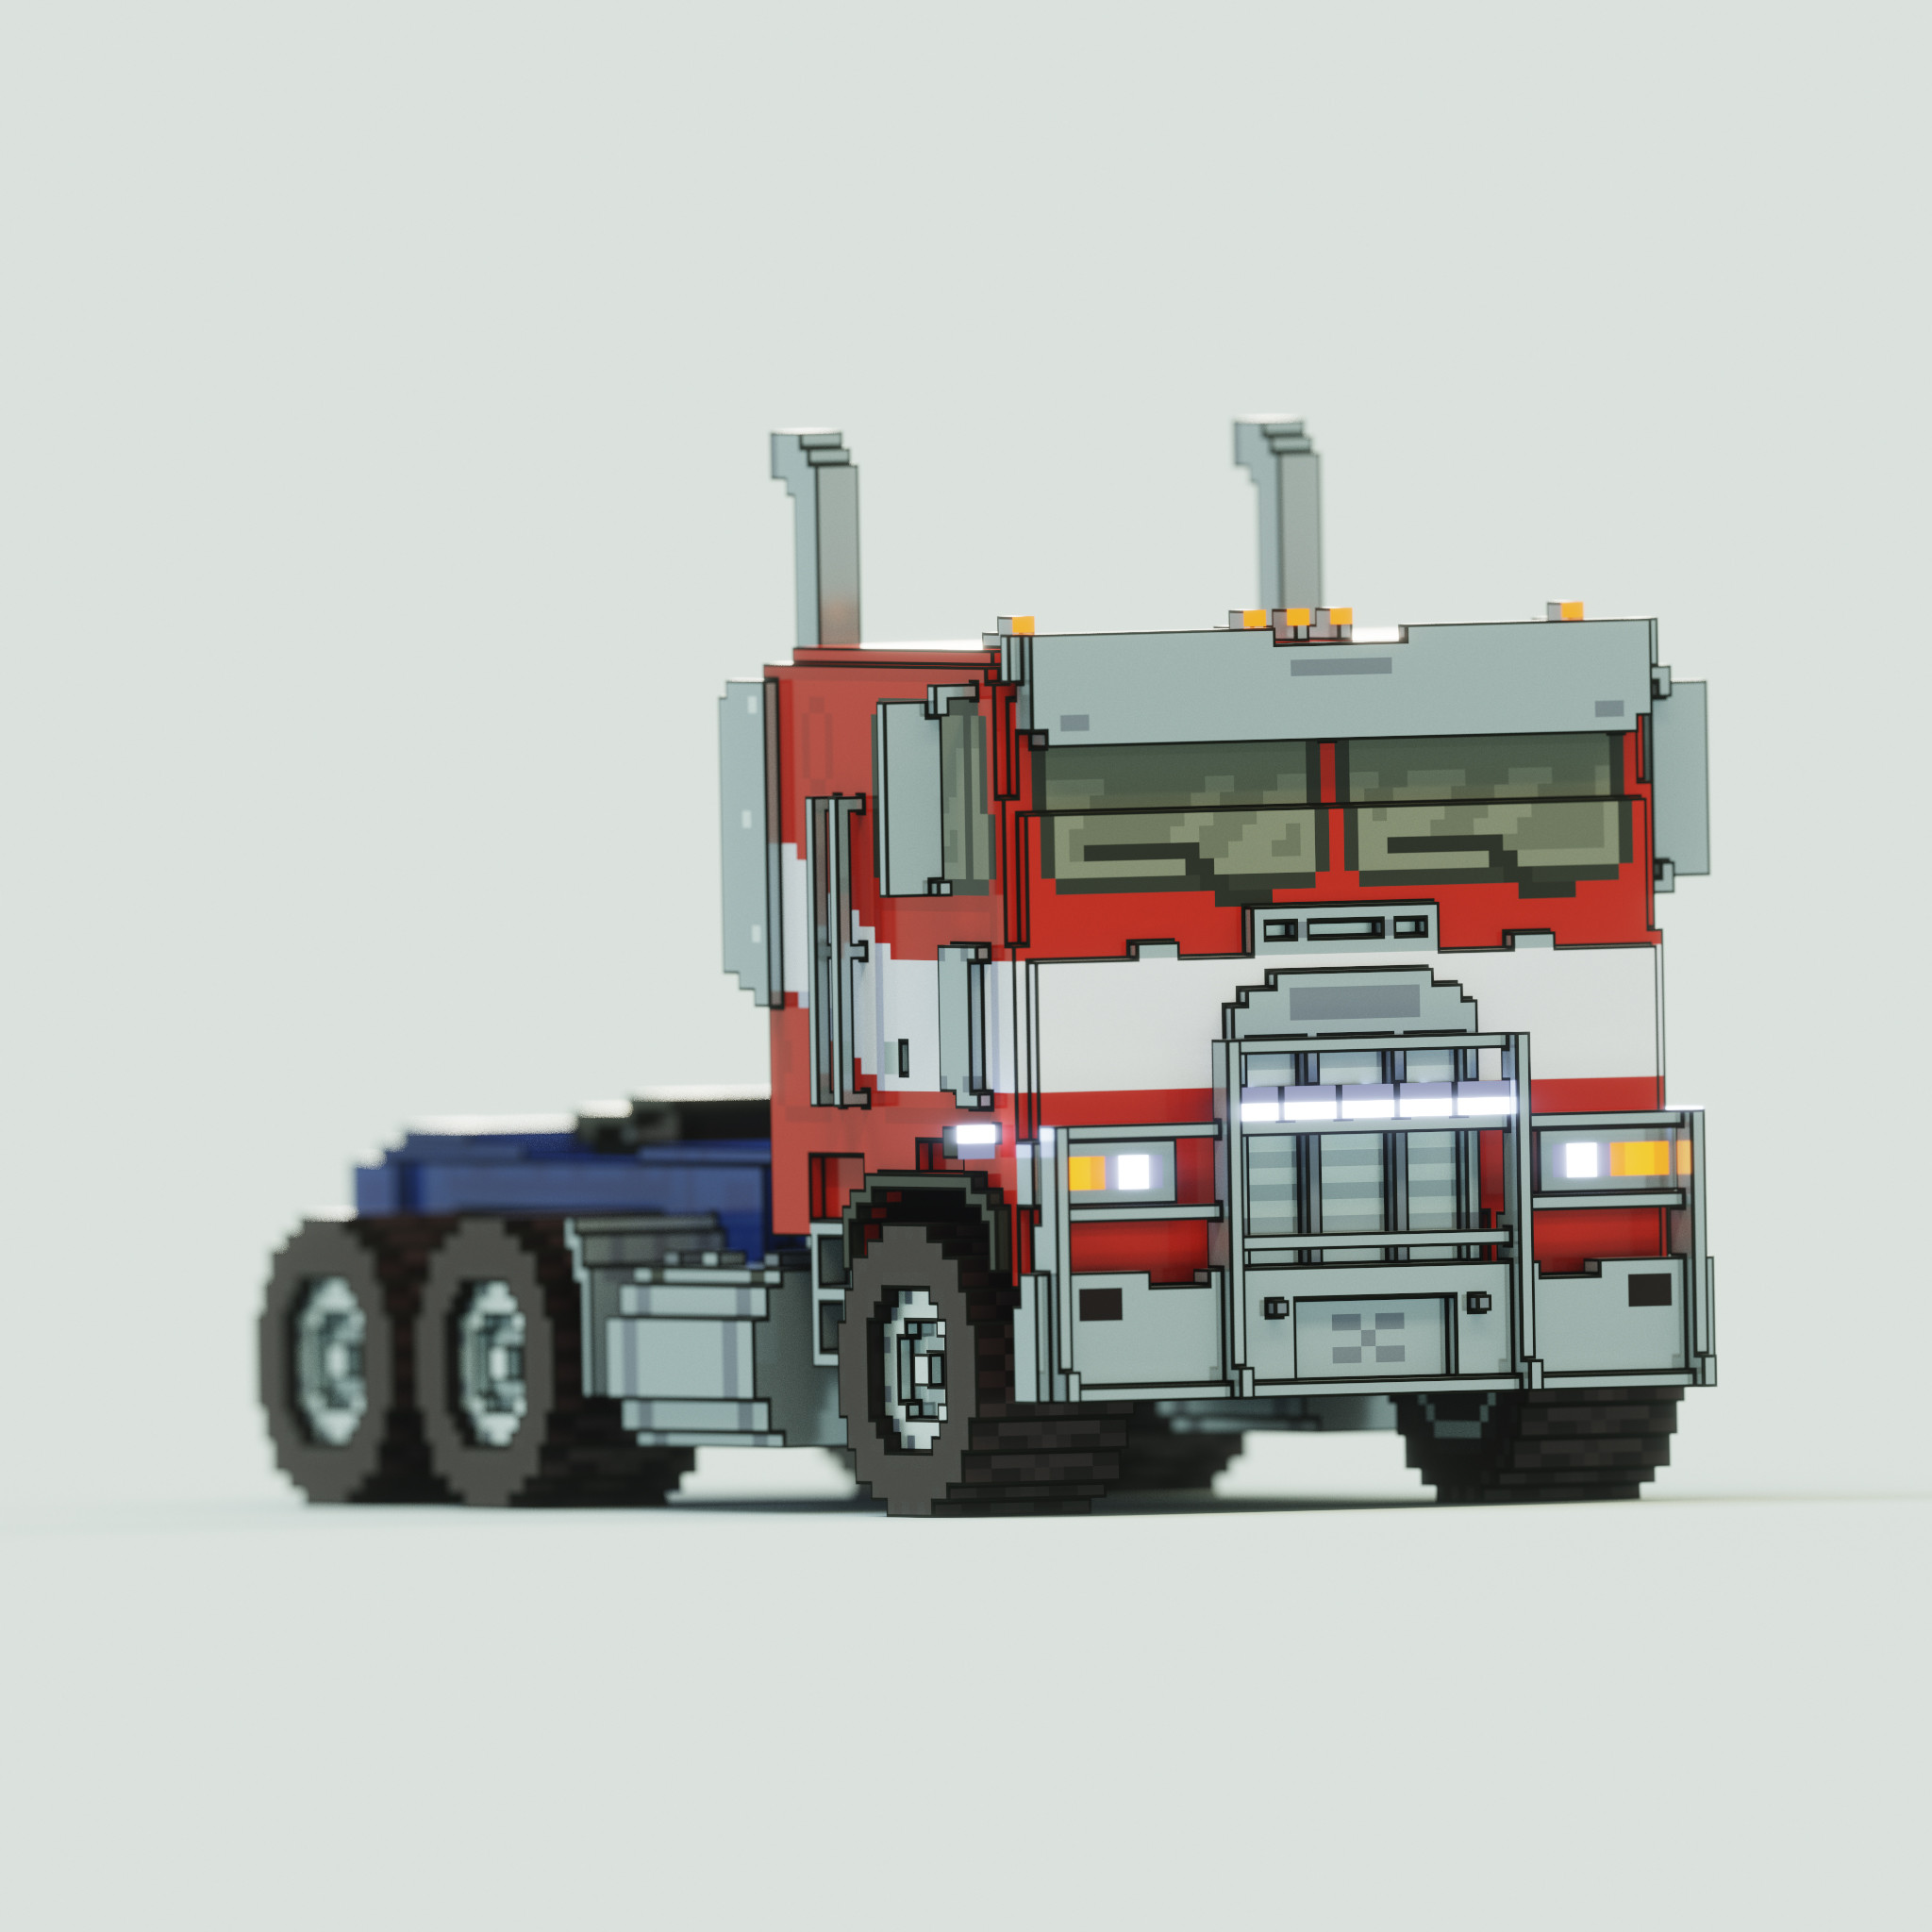 Front close up angle of Optimus Prime in his classic cab-forward semi-truck configuration.